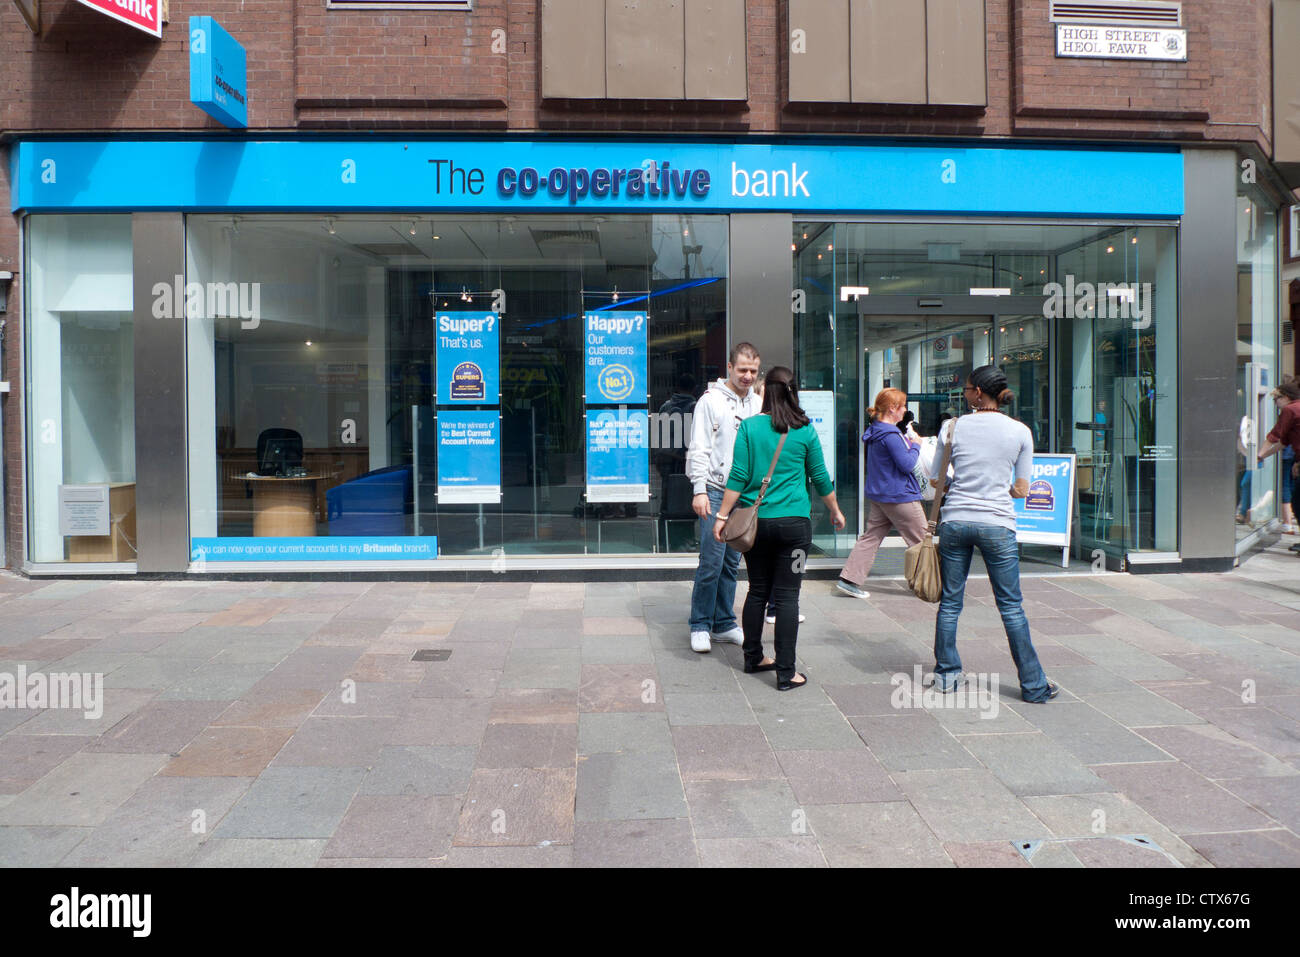 Exterior view of the Co-operative Bank St Mary's Street Cardiff, Wales UK   KATHY DEWITT Stock Photo